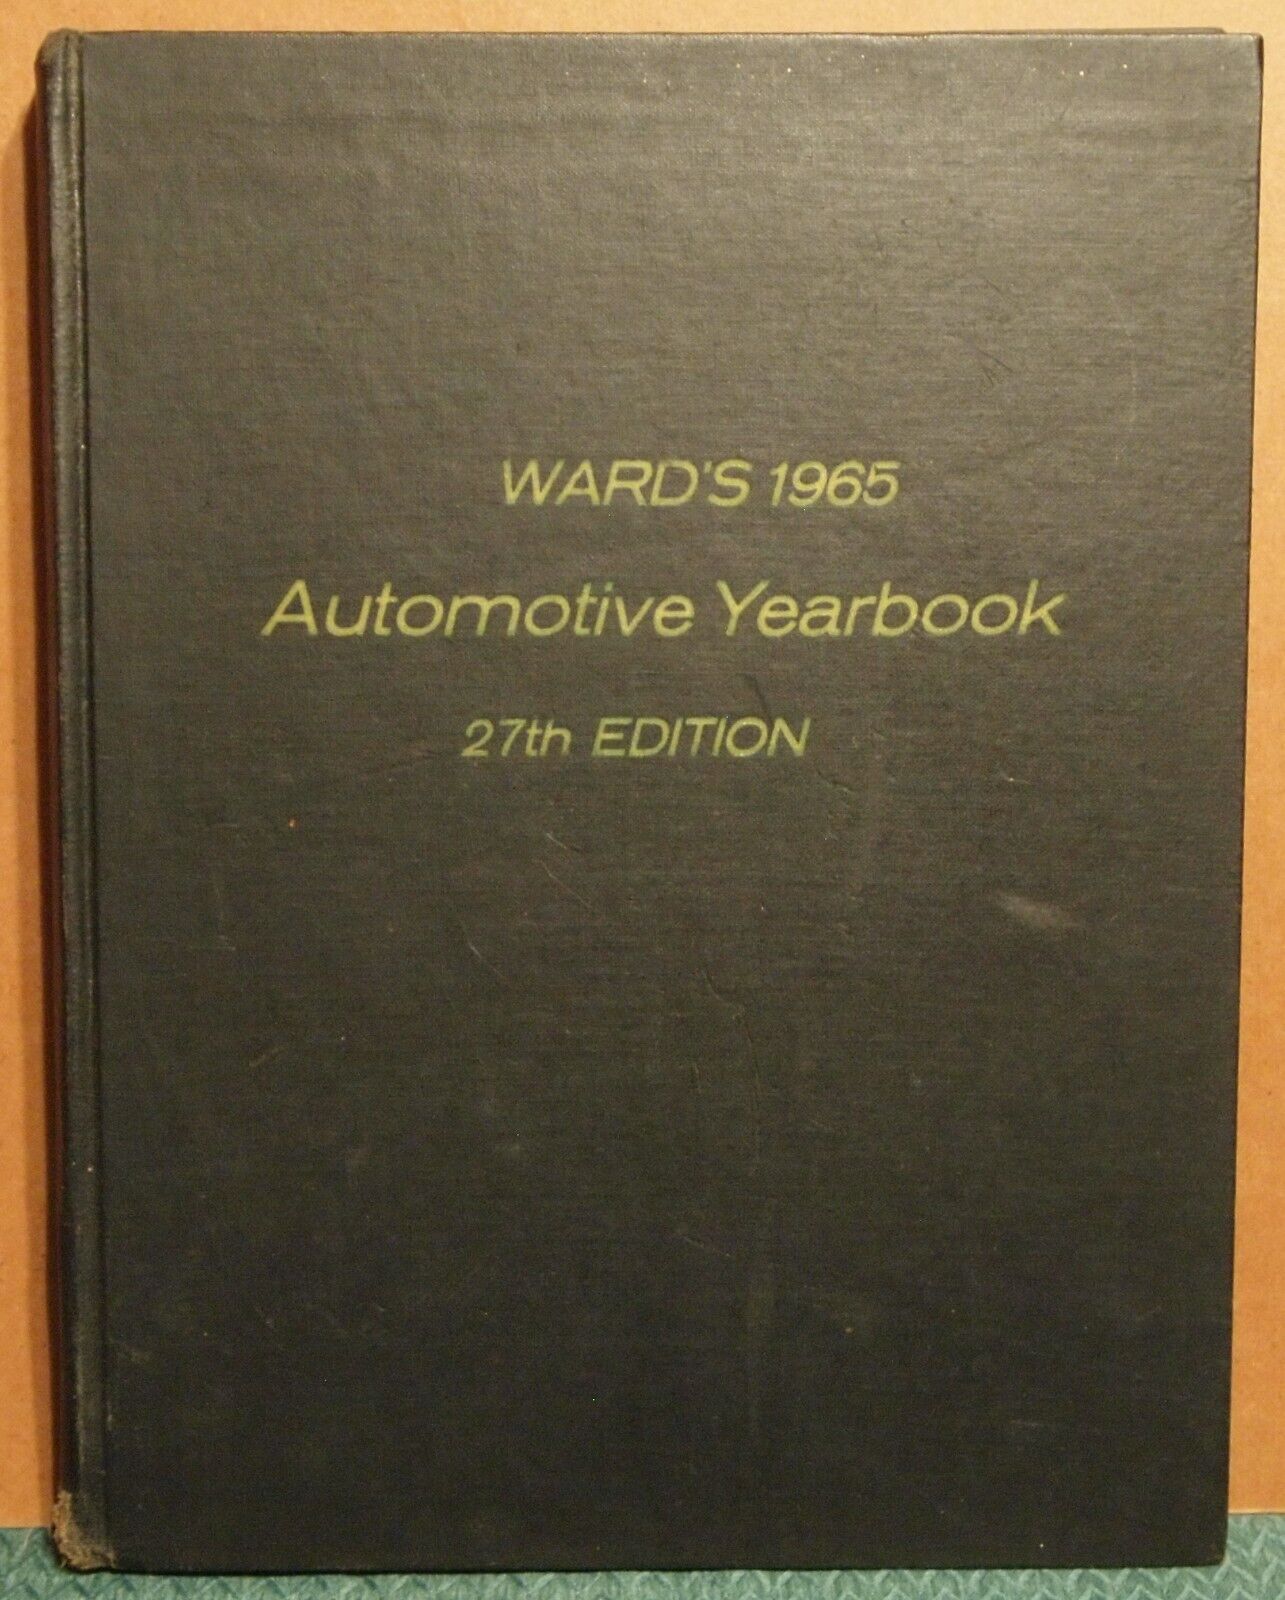 1965 WARD'S AUTOMOTIVE YEARBOOK 27th edition WARDS-17